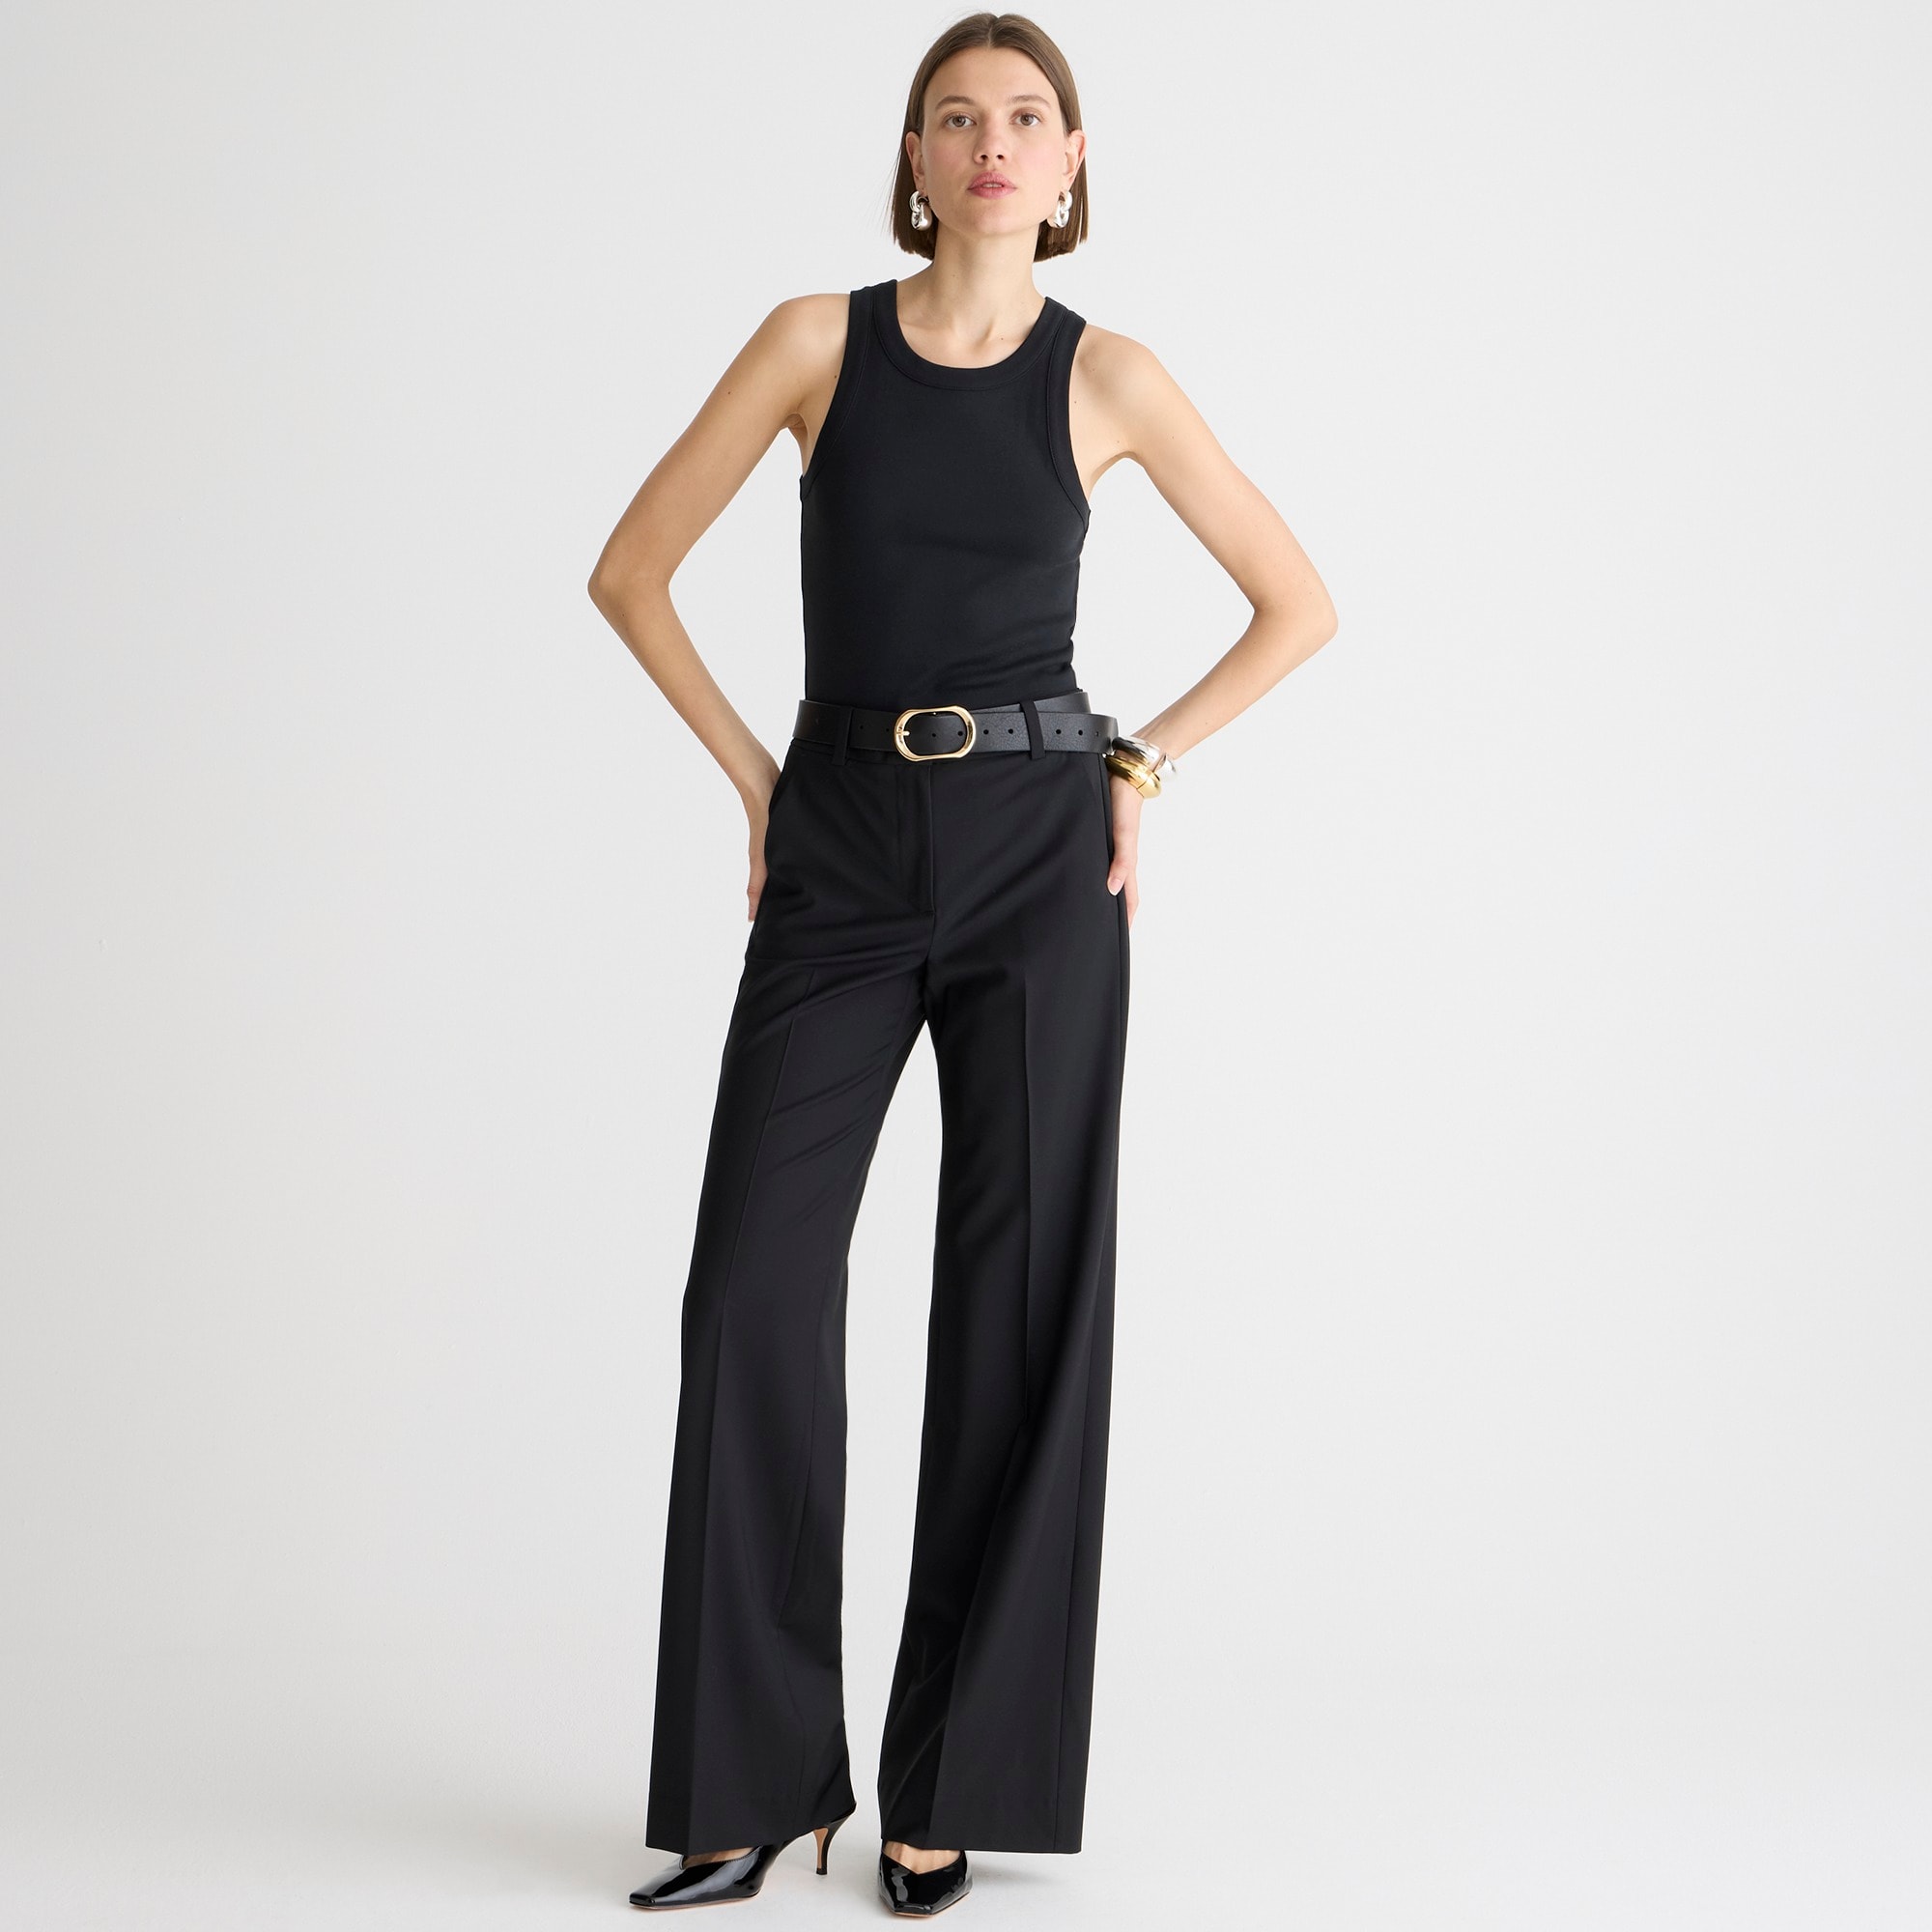  Tall Carolina flare pant in lightweight suiting wool blend